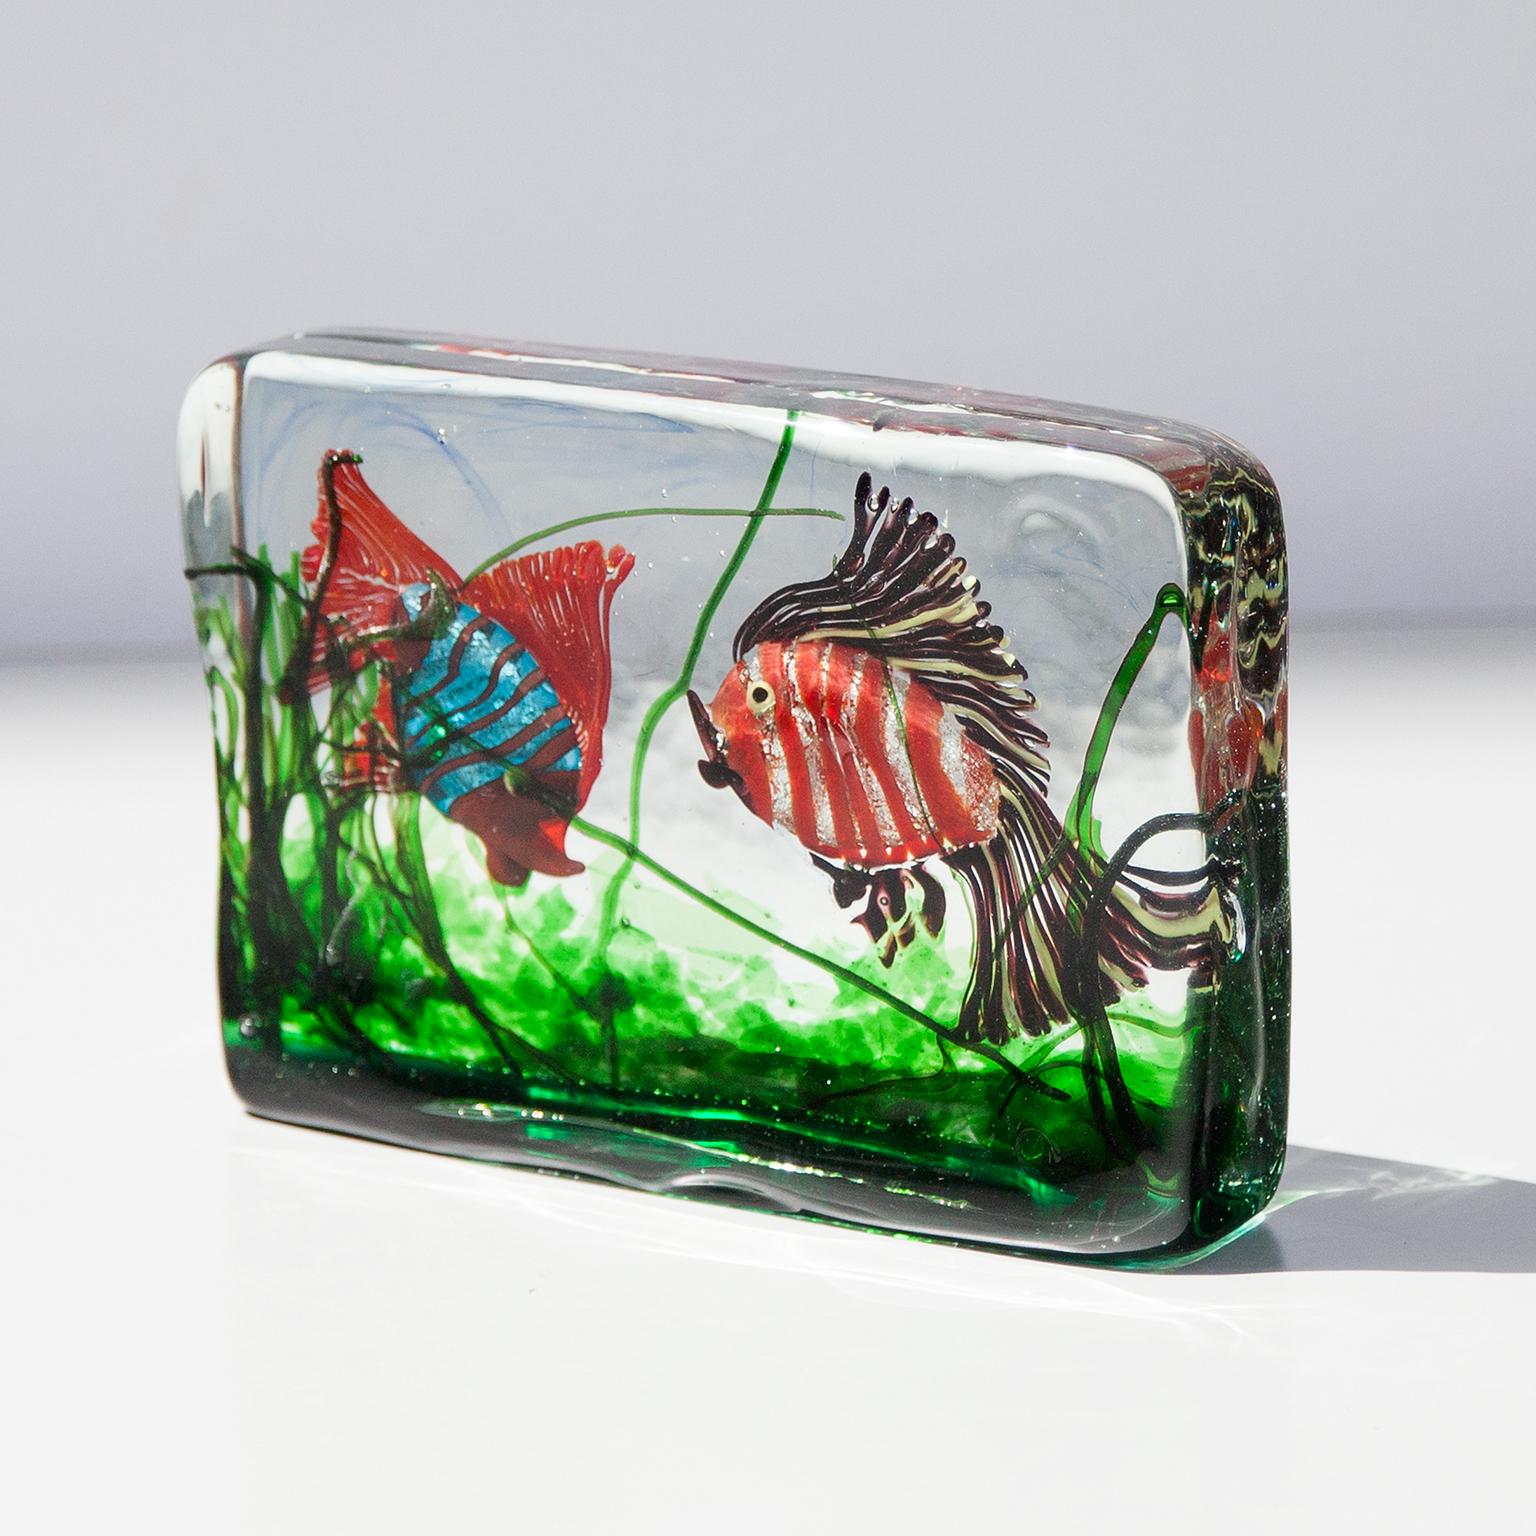 Alfredo Barbini Aquarium Murano Glass Object for Cenedese 1960 in very colorful Murano glass with inclusions of two fishes and sea plants within clear glass. Italy circa 1960s.
